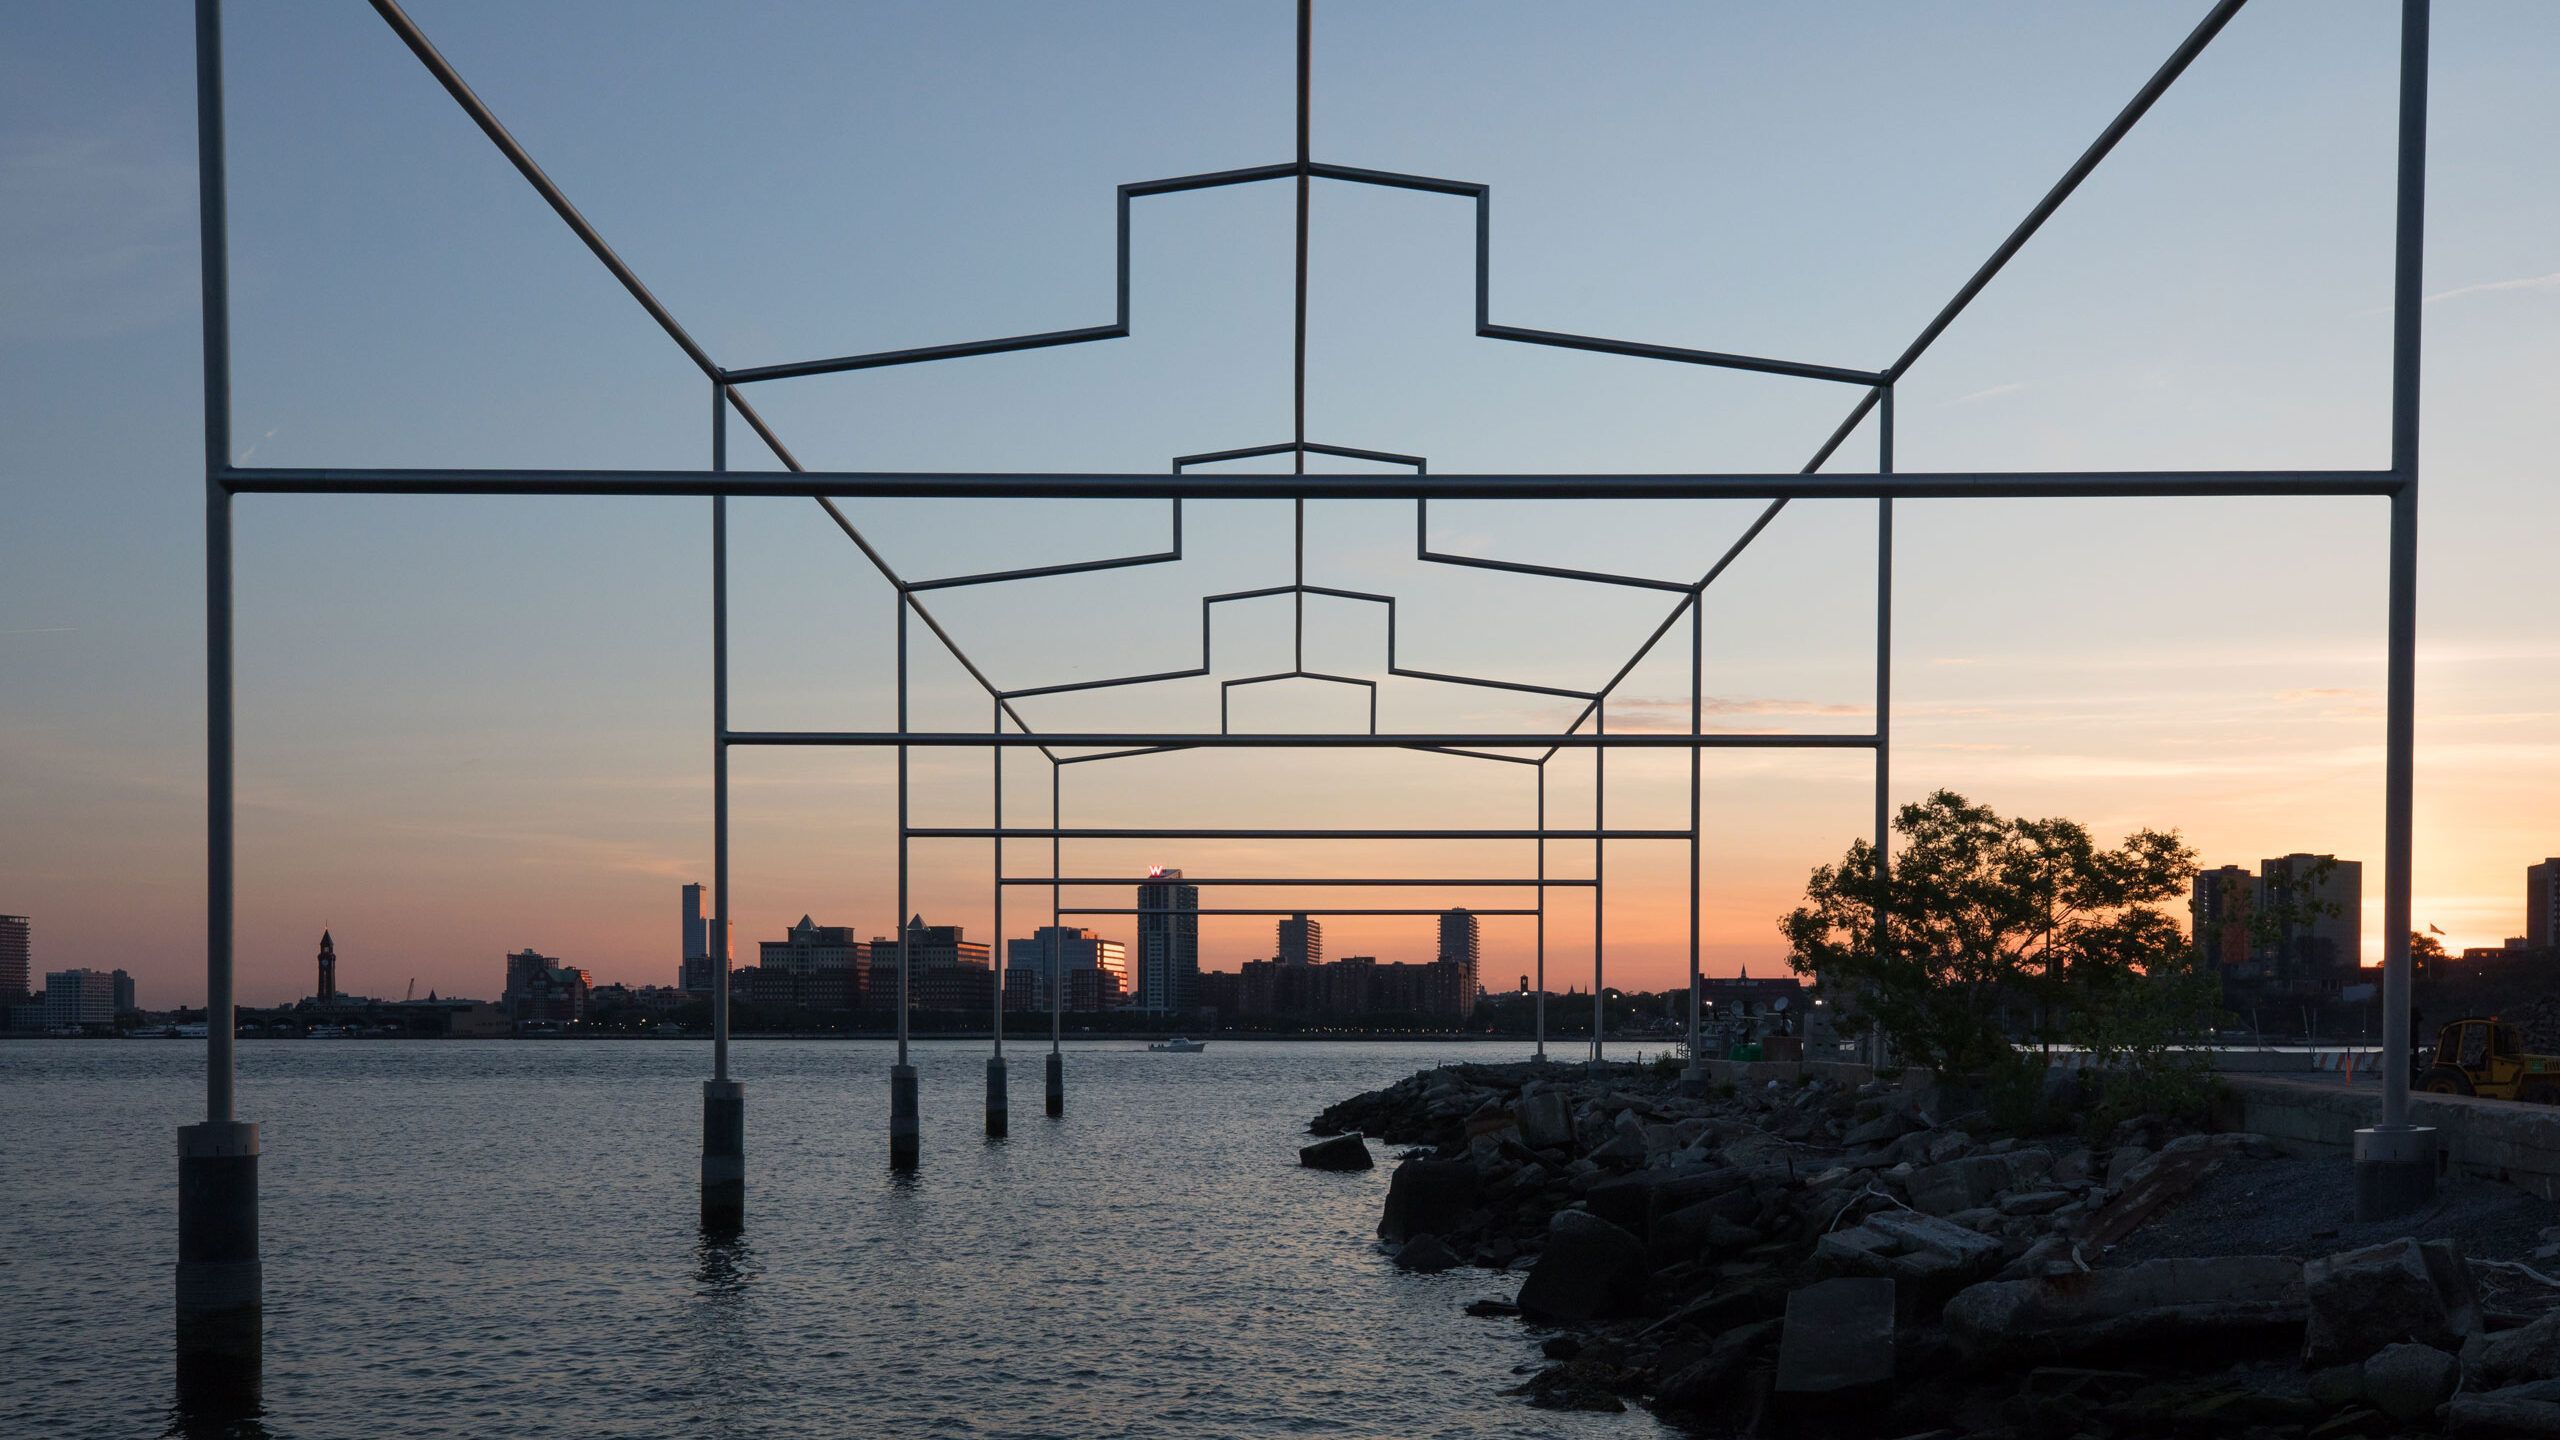 Day's End by David Hammons, a gift from the Whitney Museum, sits on the Hudson River at sunset